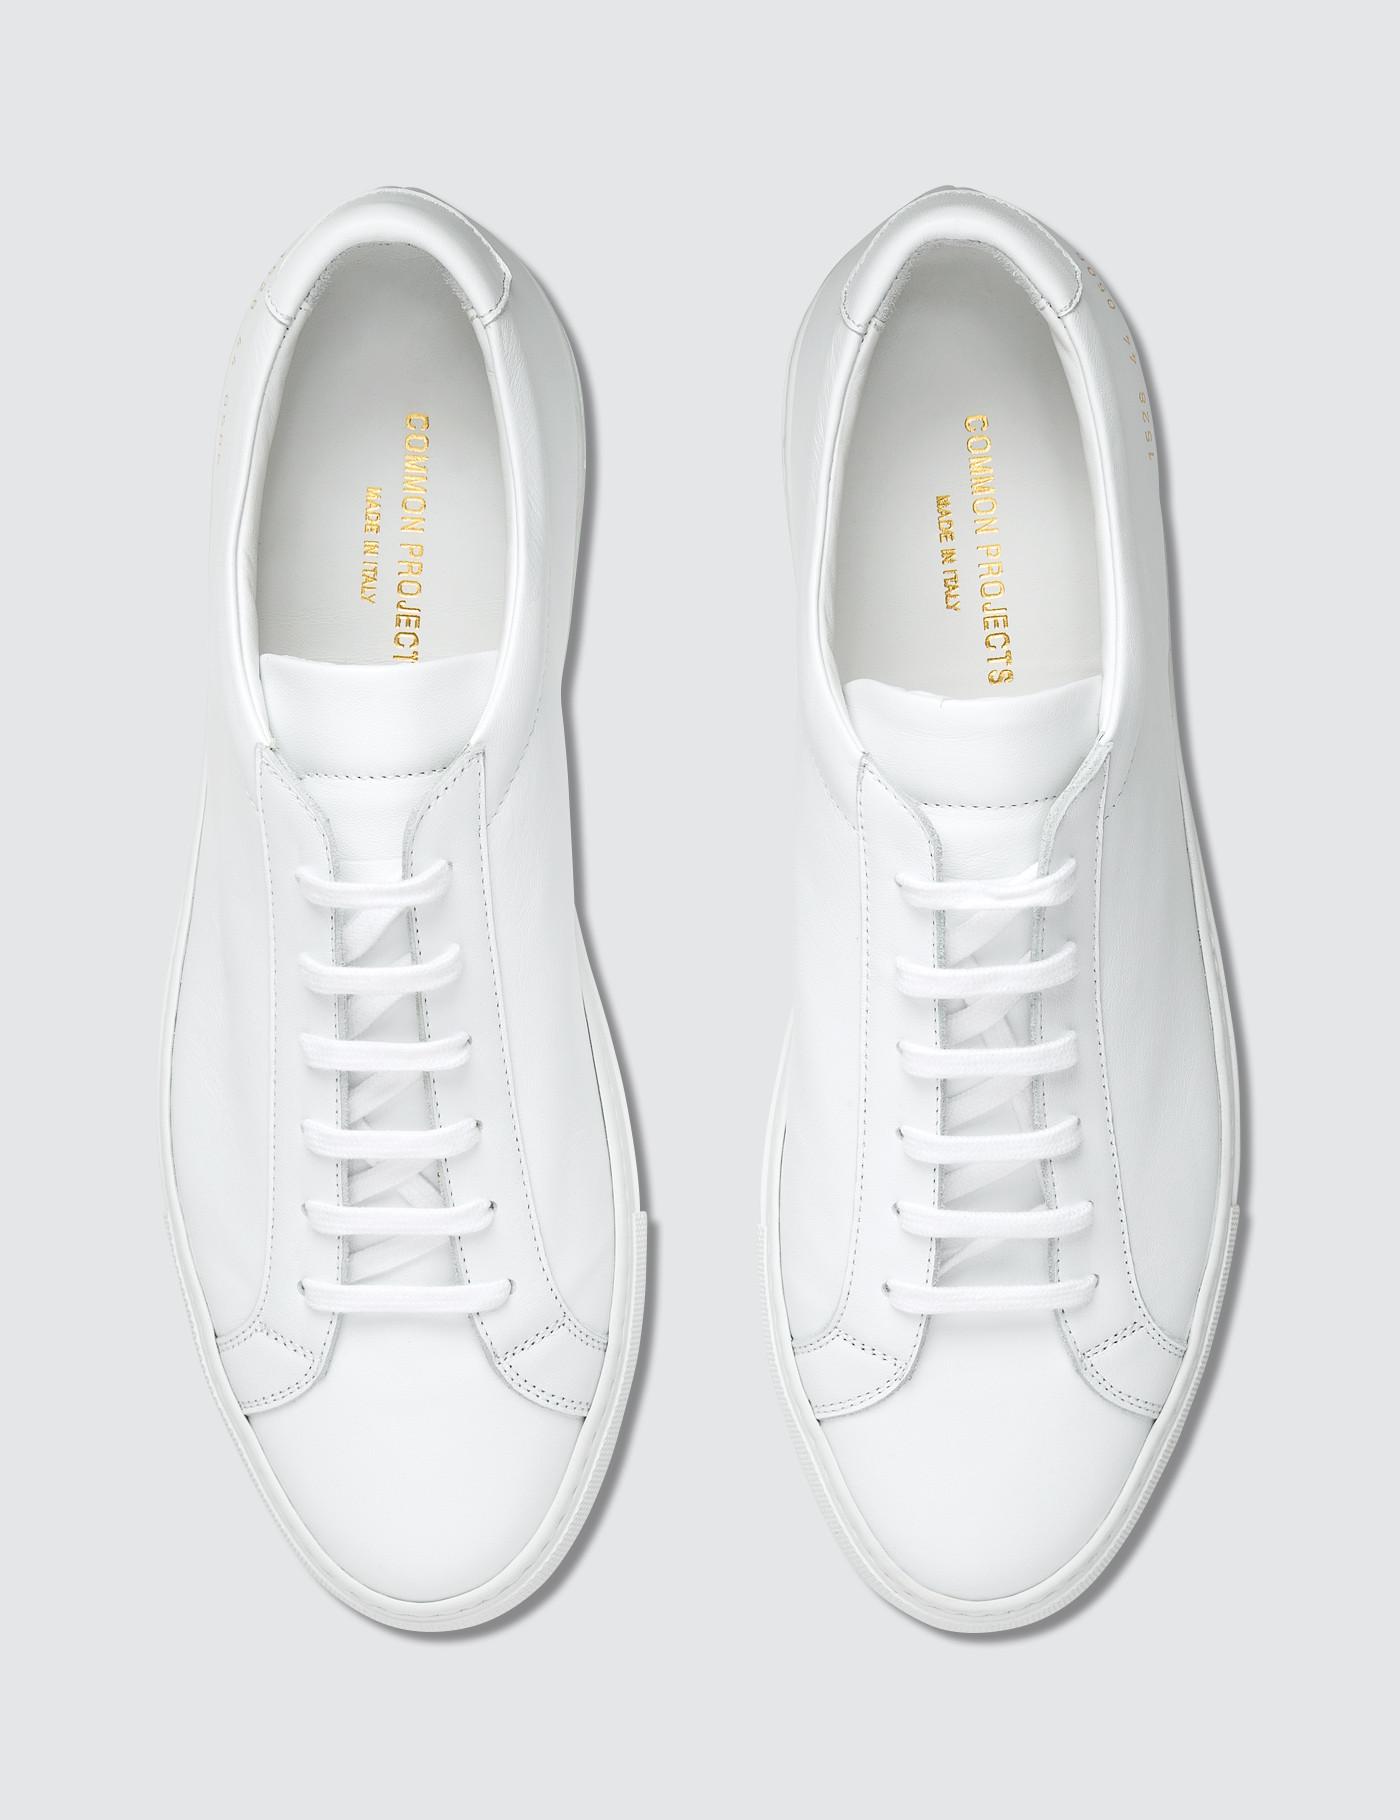 Common Projects Leather Original Achilles Low in White for Men - Lyst